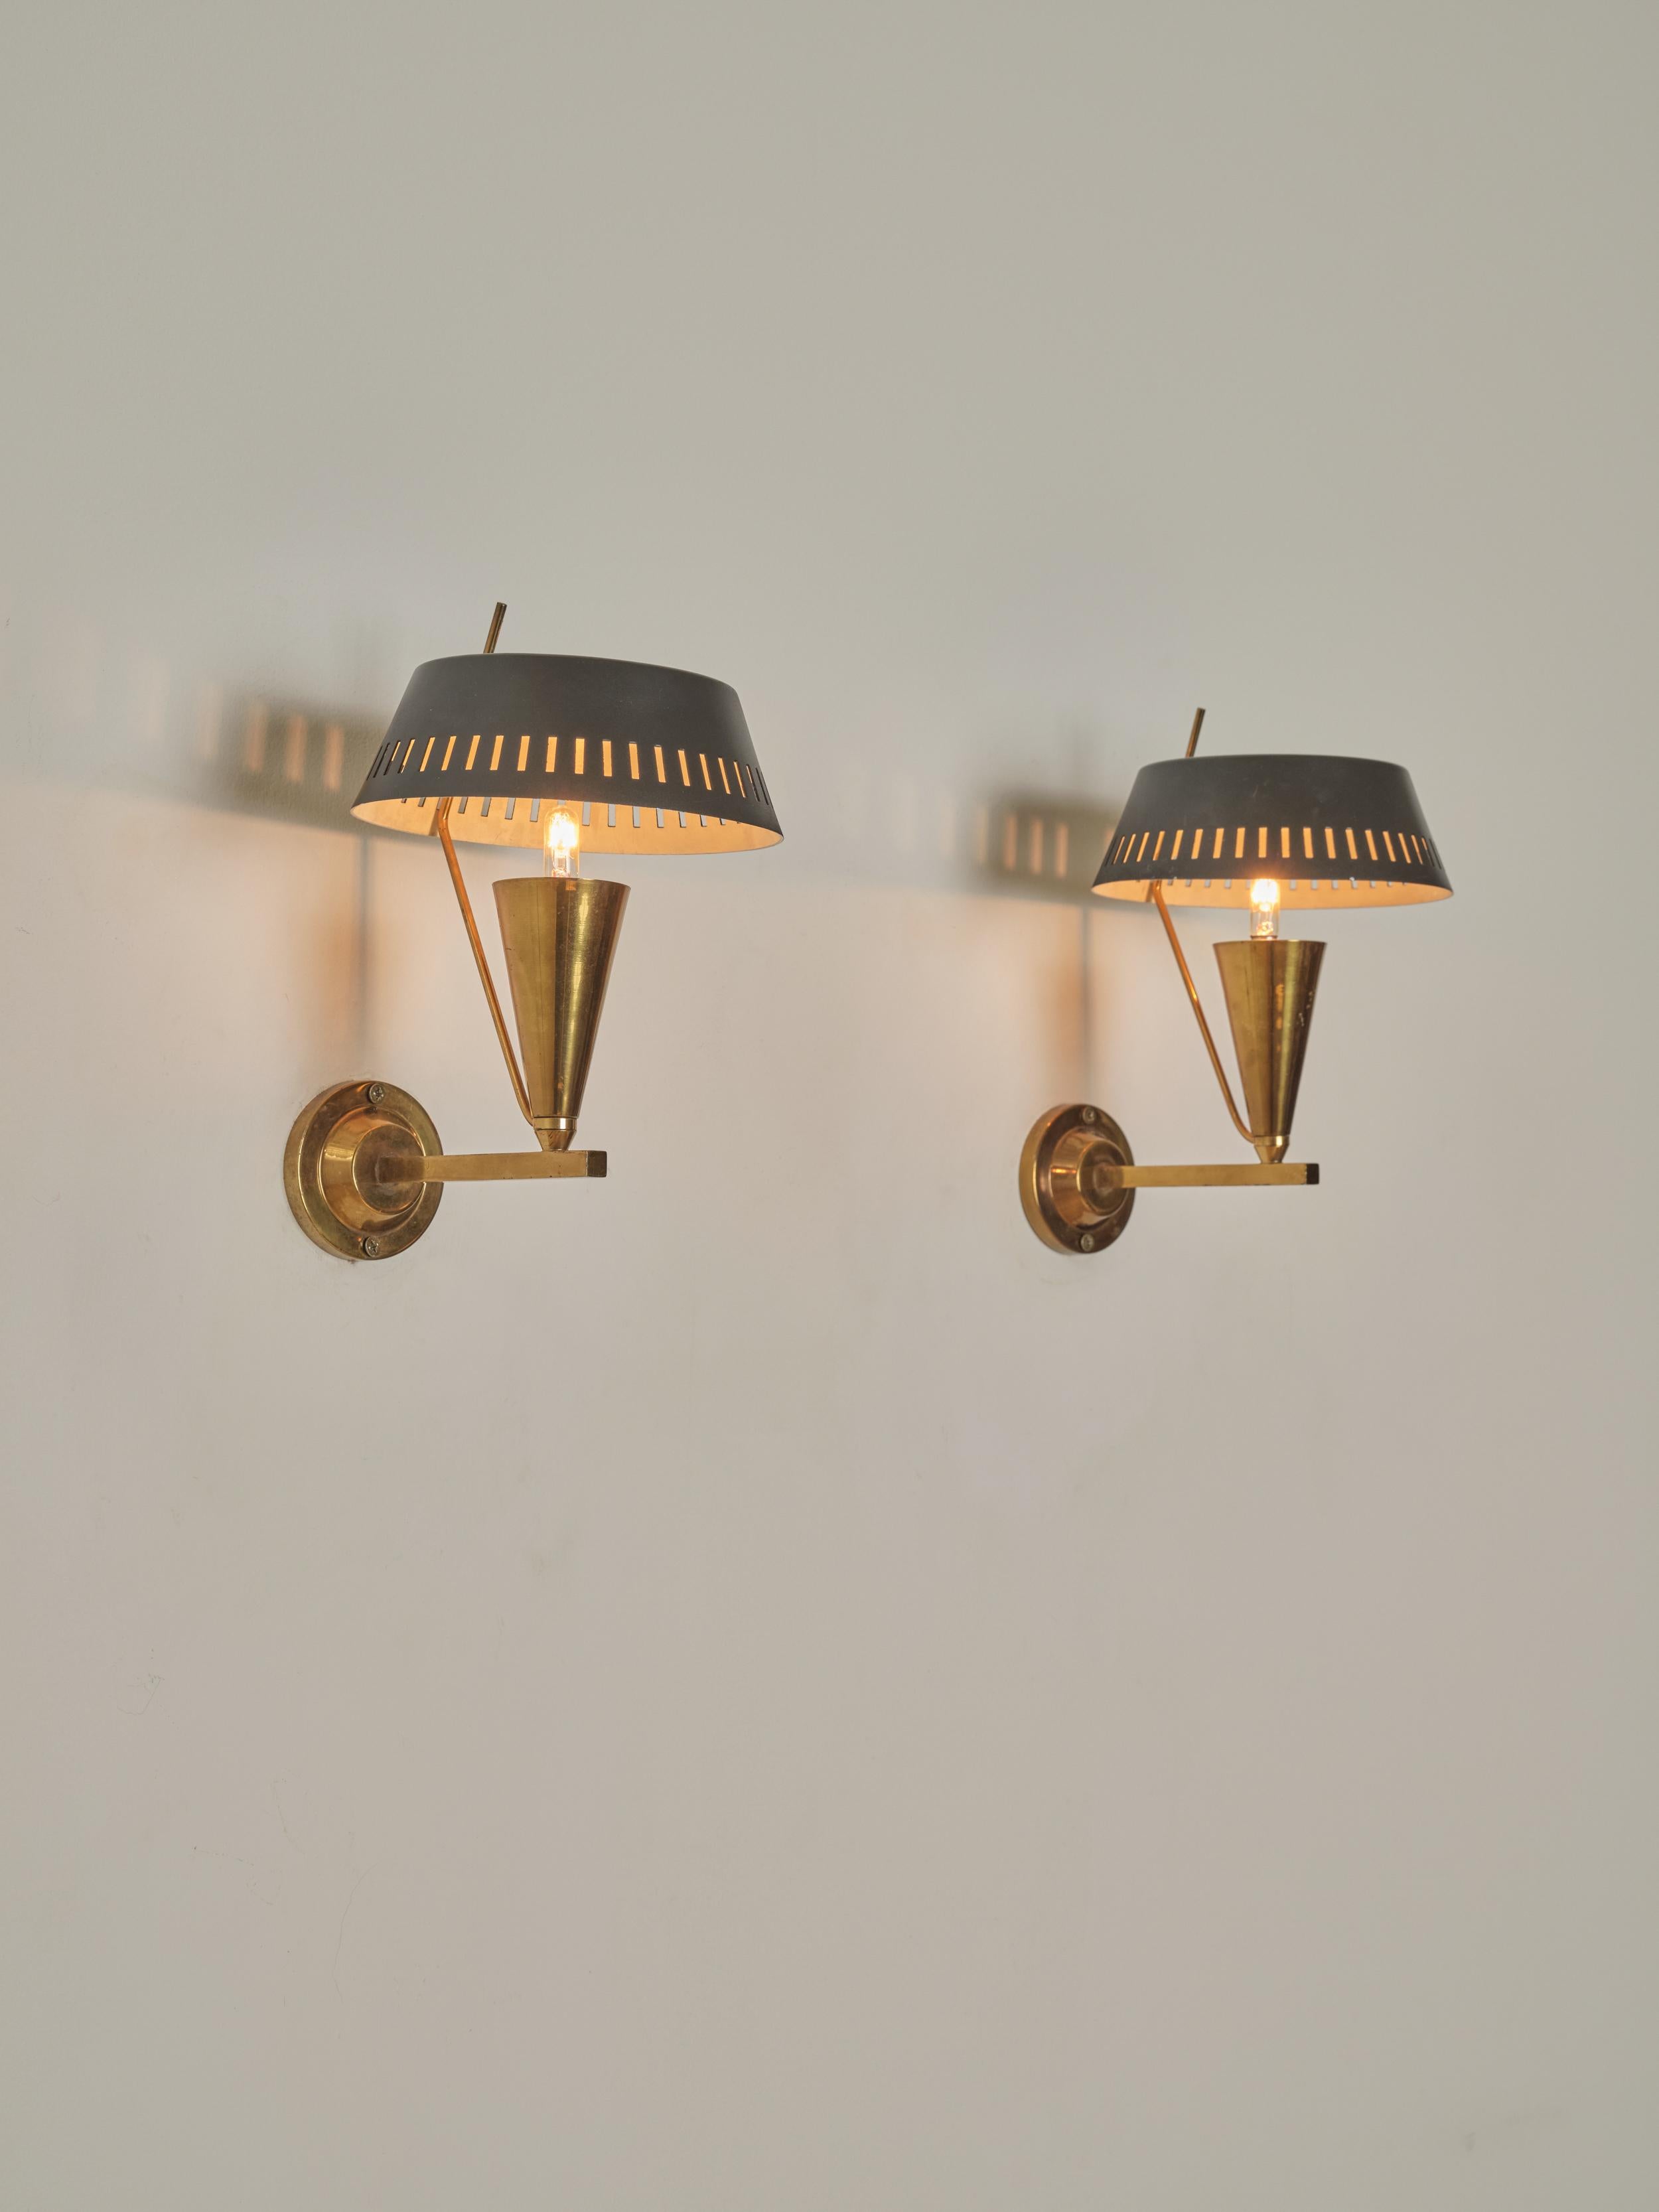 A Pair of Italian Tubular Wall Sconces with painted black metal and brass hardware.

